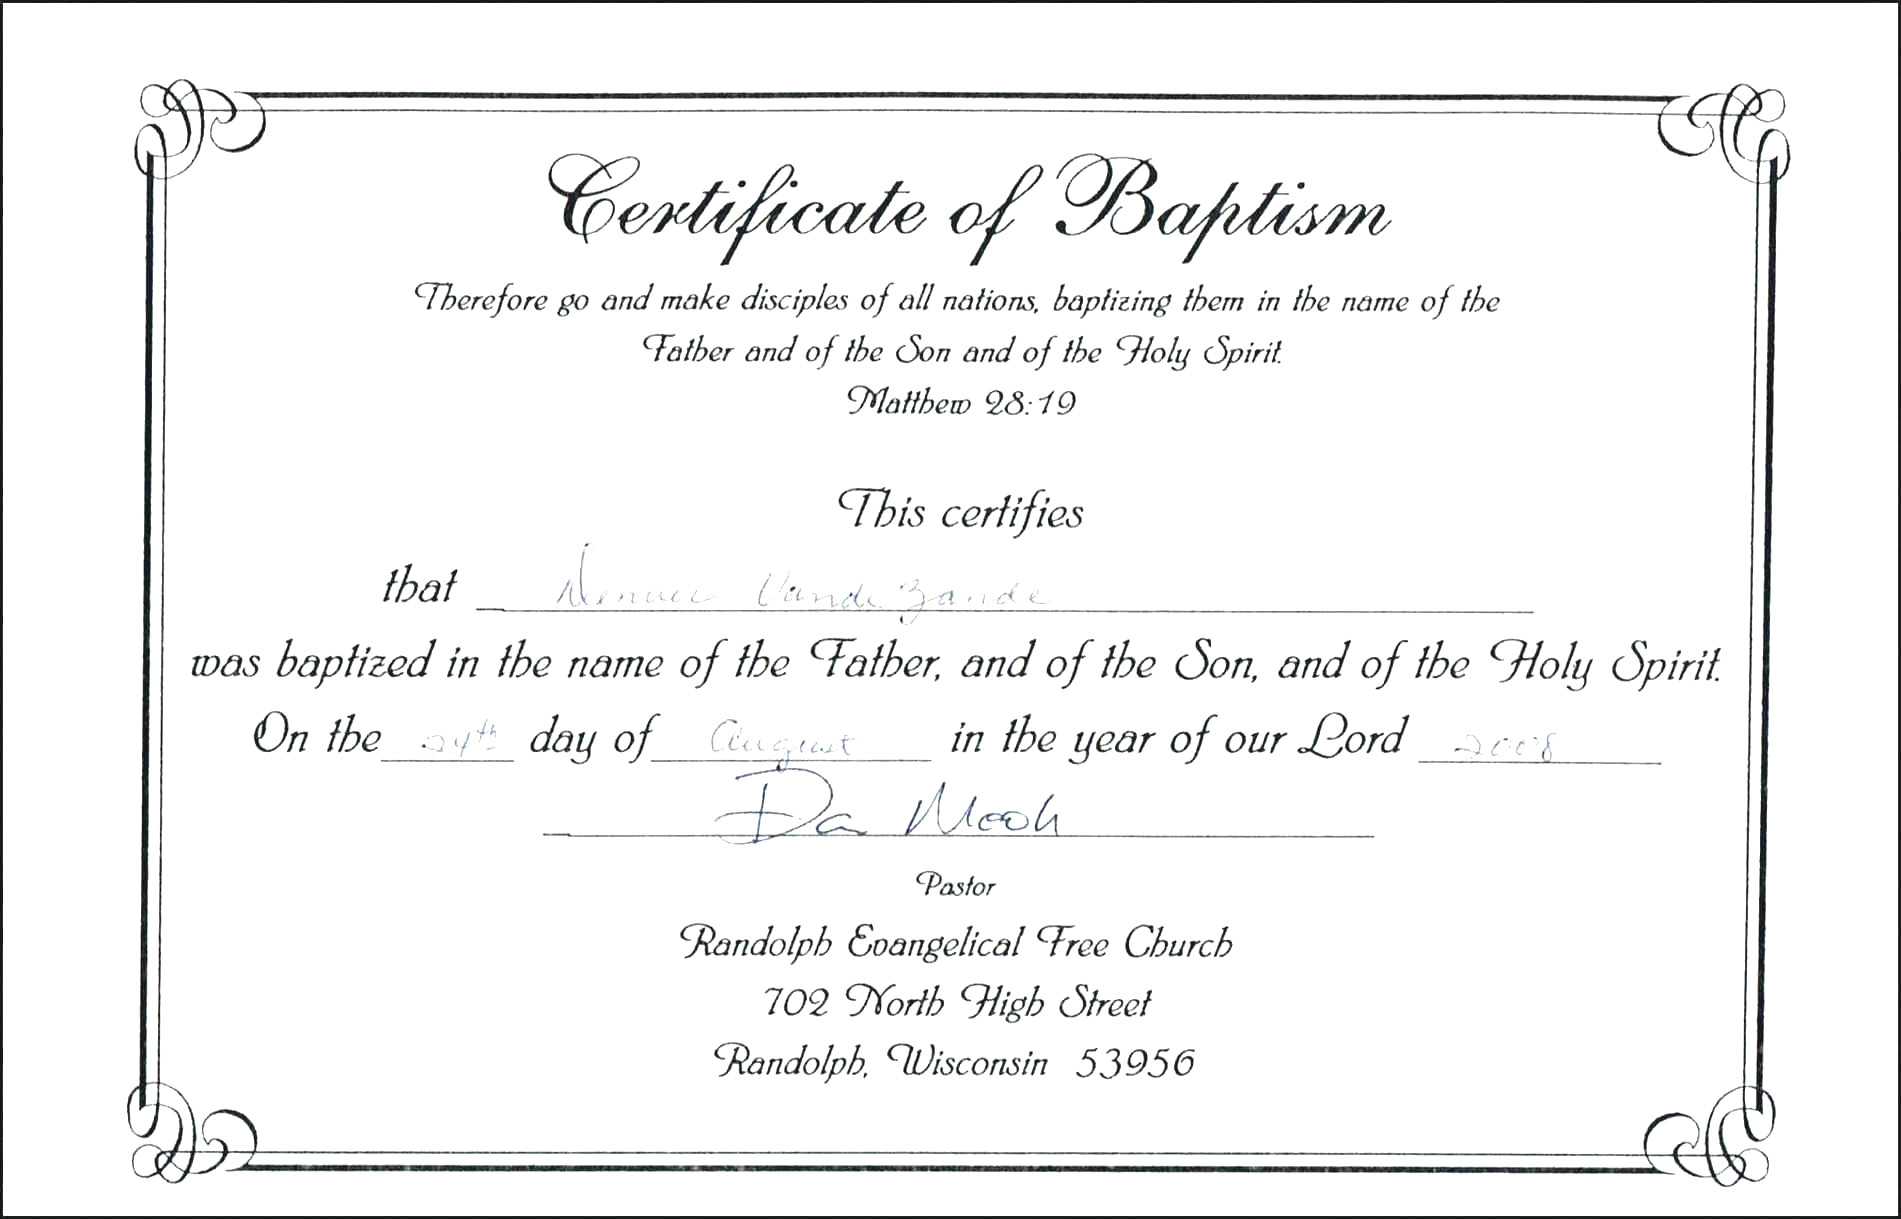 328 Certificate Of Baptism Template | Wiring Library Pertaining To Baptism Certificate Template Word